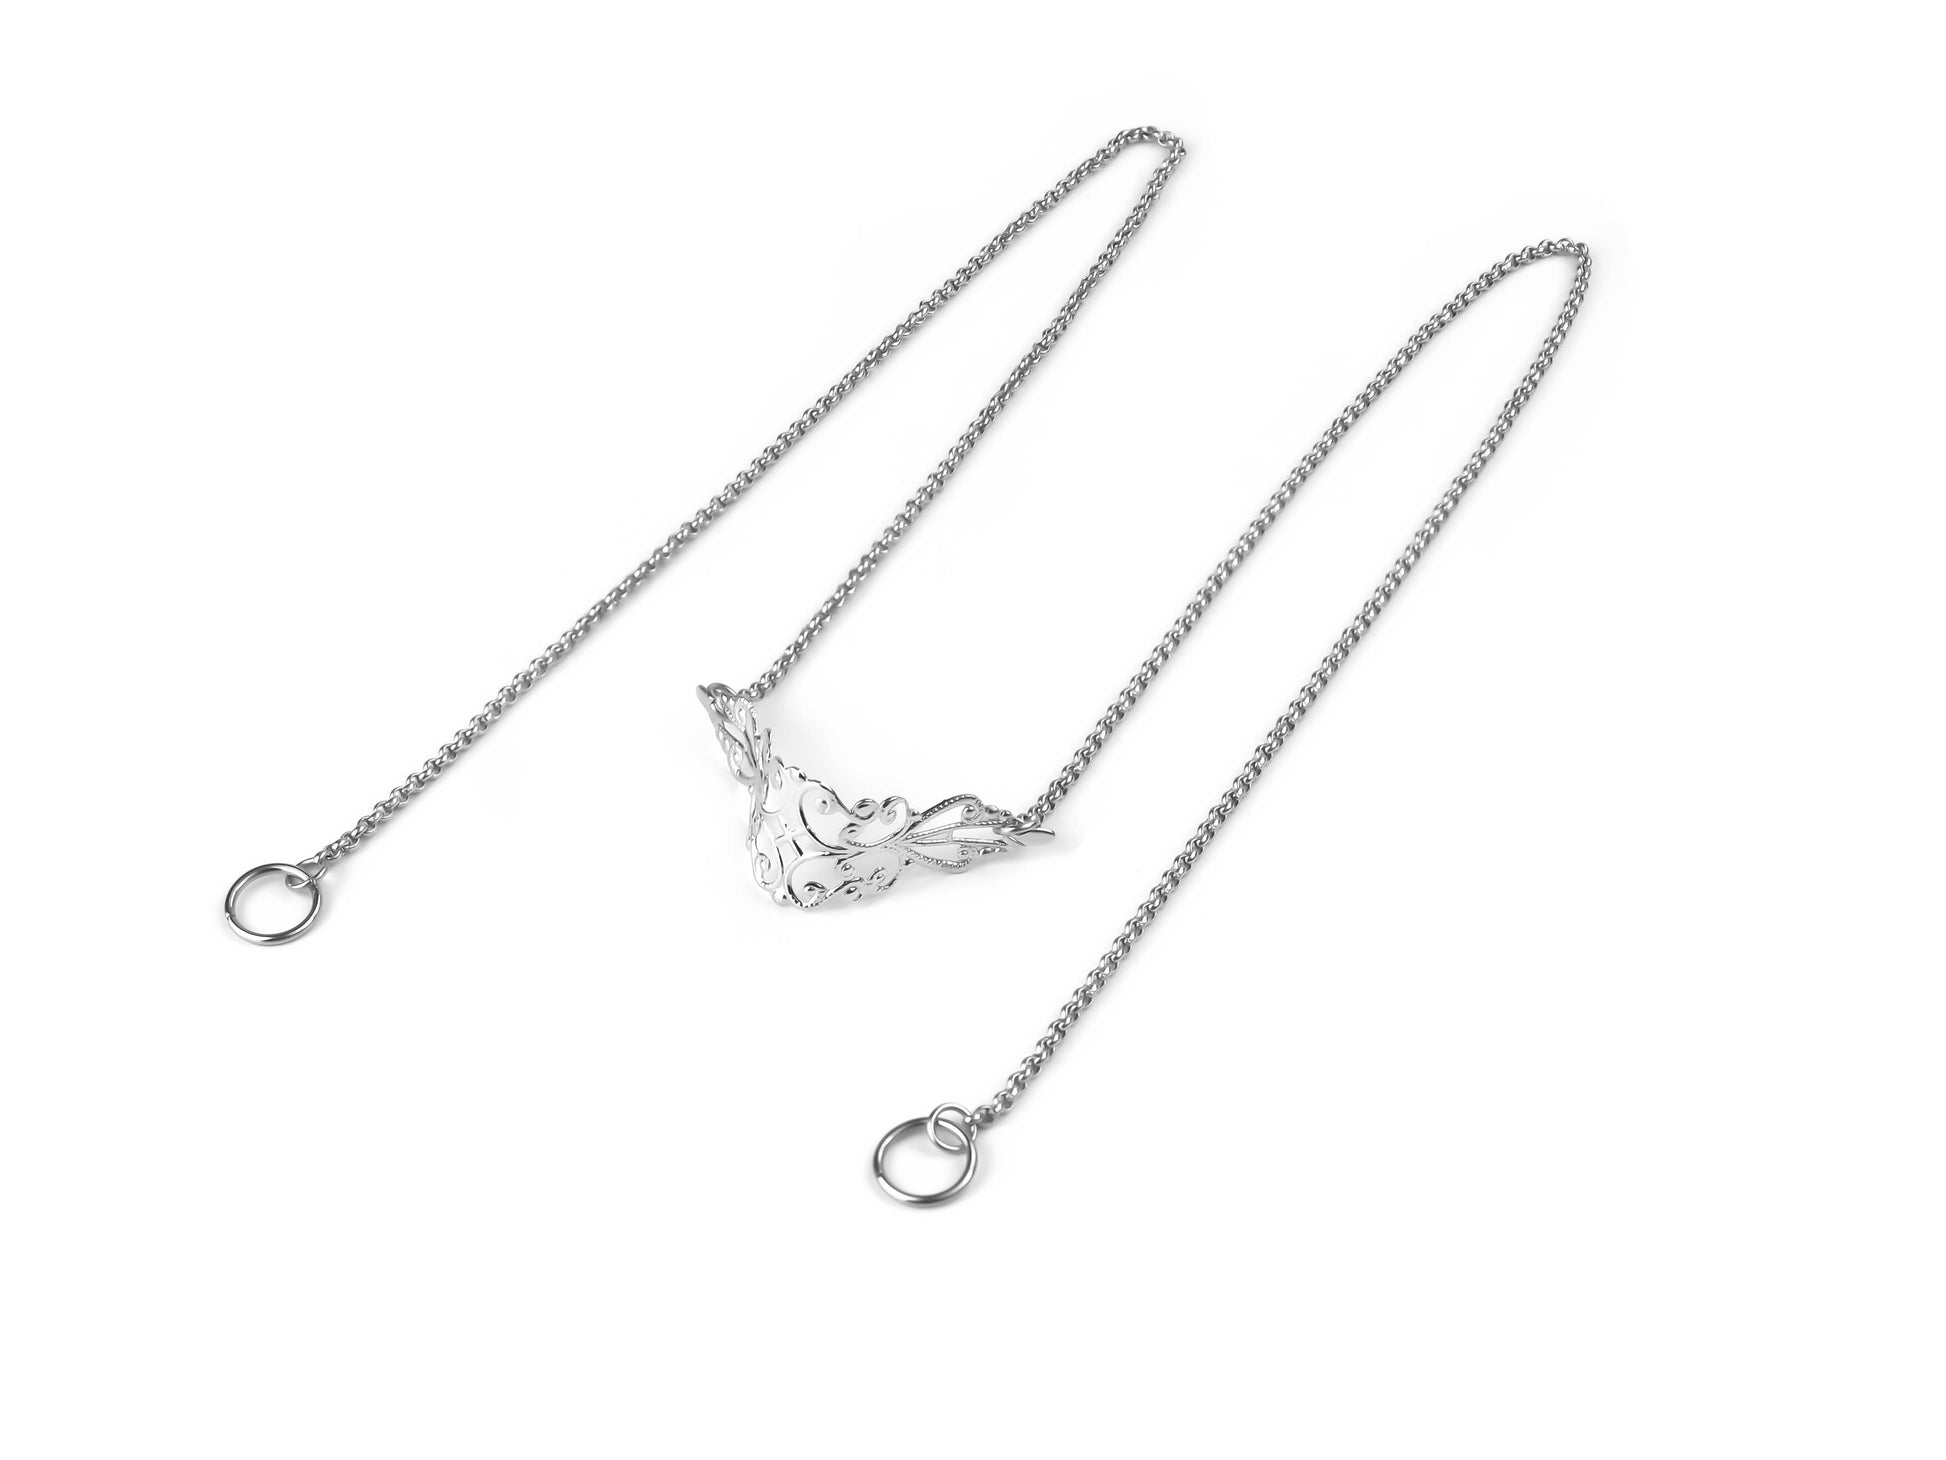 A sleek Myril Jewels nose chain with delicate filigree work, set against a crisp white background, epitomizing neo-gothic style for a dramatic, alternative look